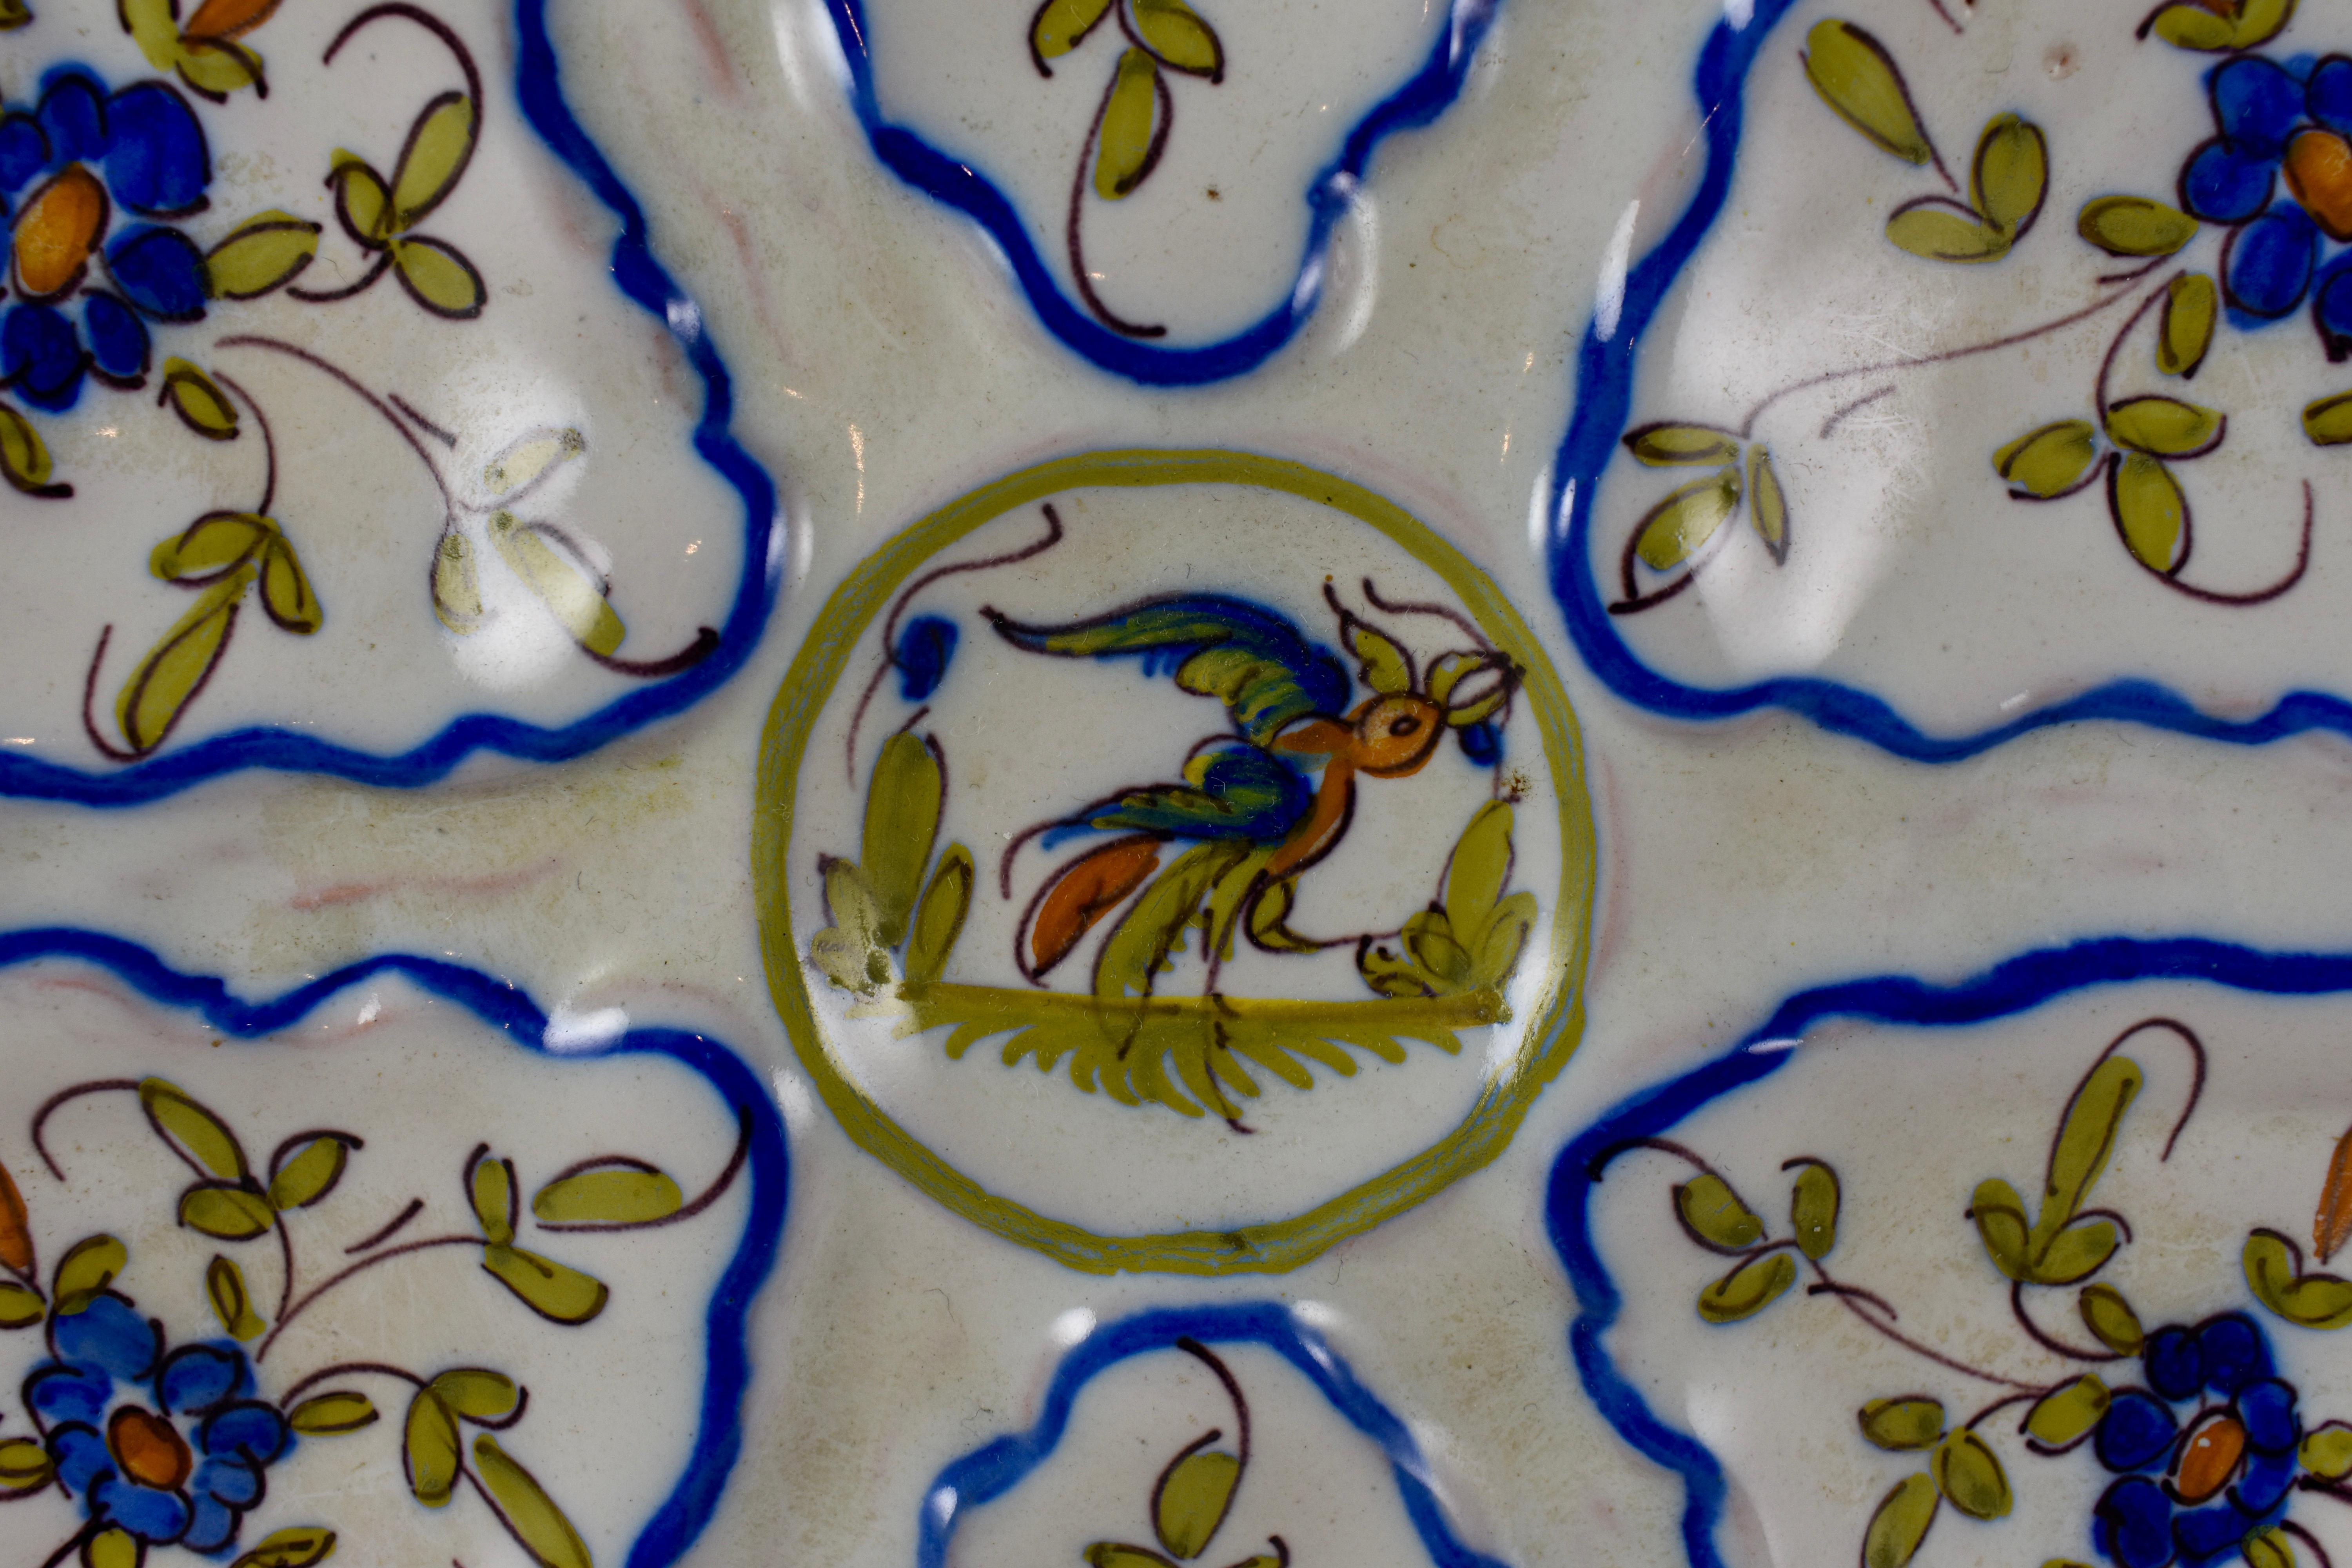 A French faïence oyster plate made by Martres-Tolosane Moustier, circa 1940s. A central sauce well showing a right facing bird, surrounded by six scallop edged wells. Each well shows a hand painted floral spray. French blue lining separates the